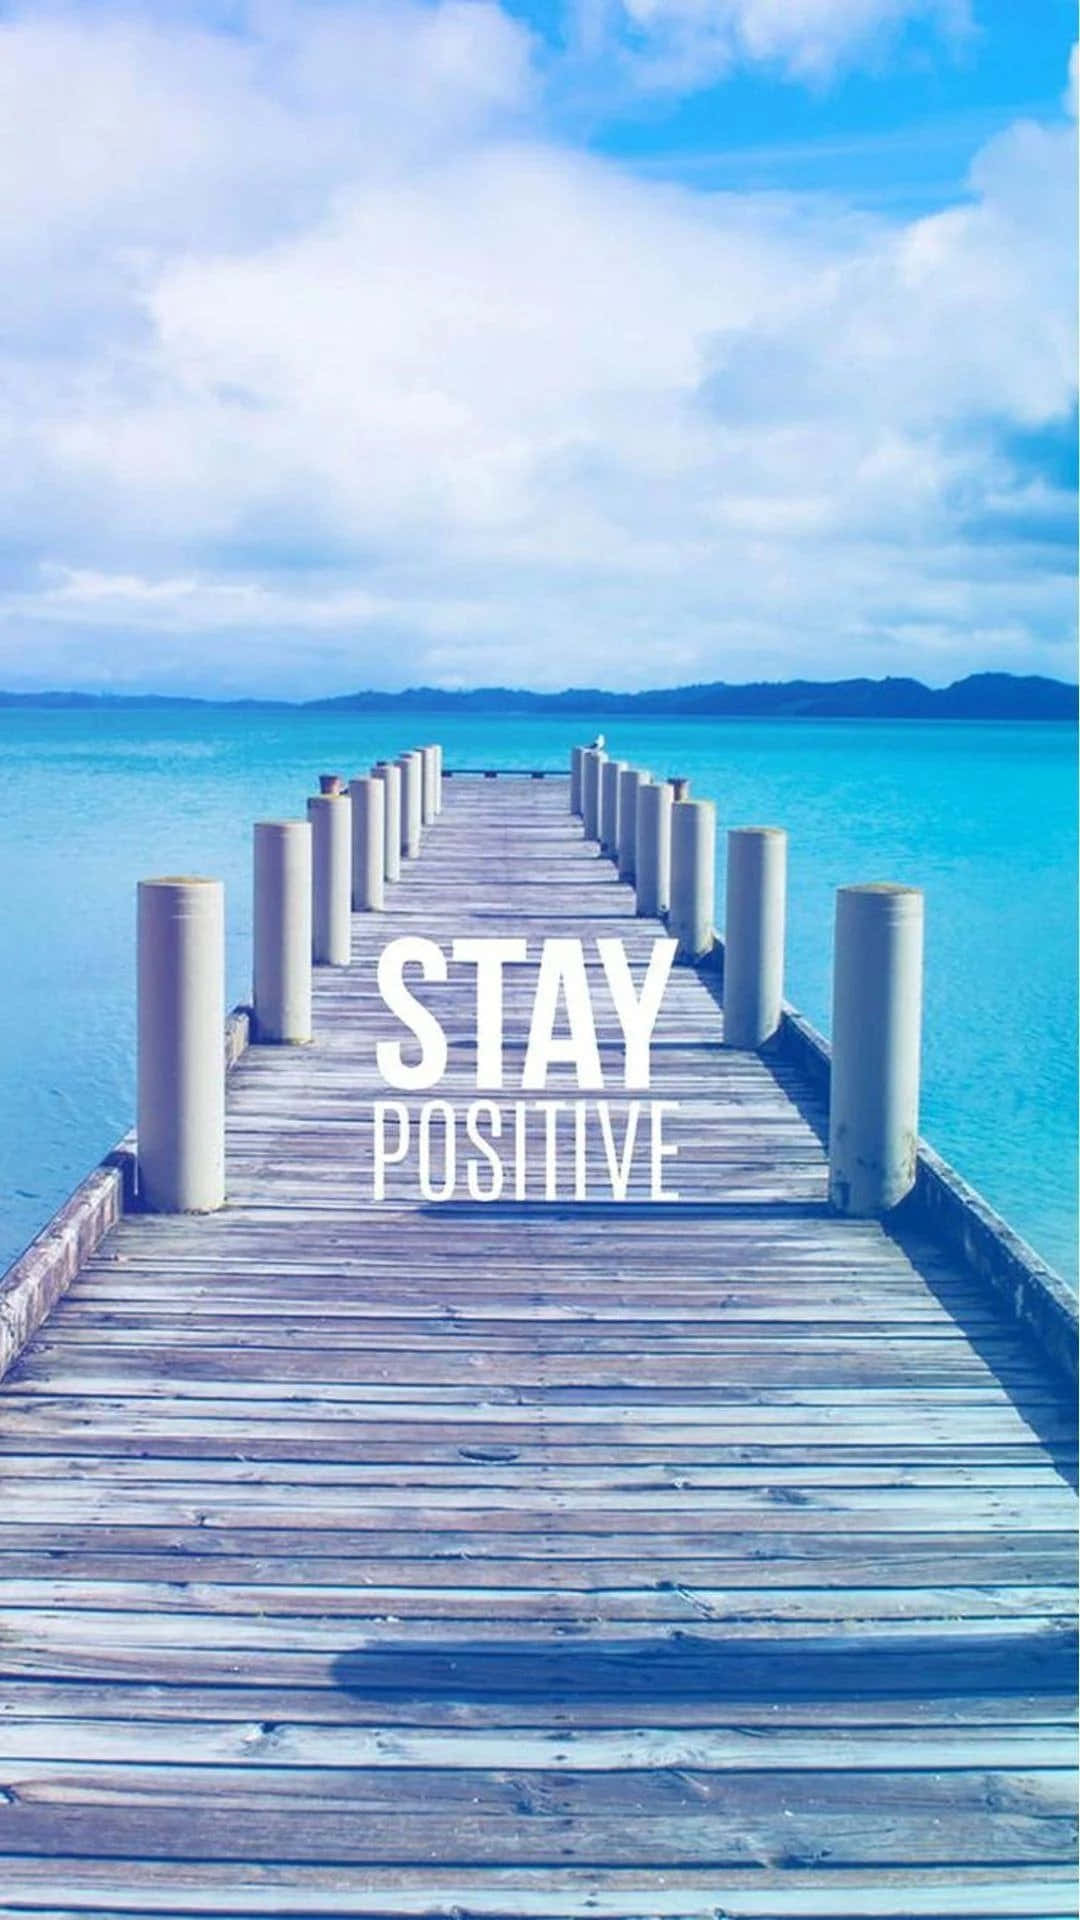 positive thinking quotes wallpapers for desktop